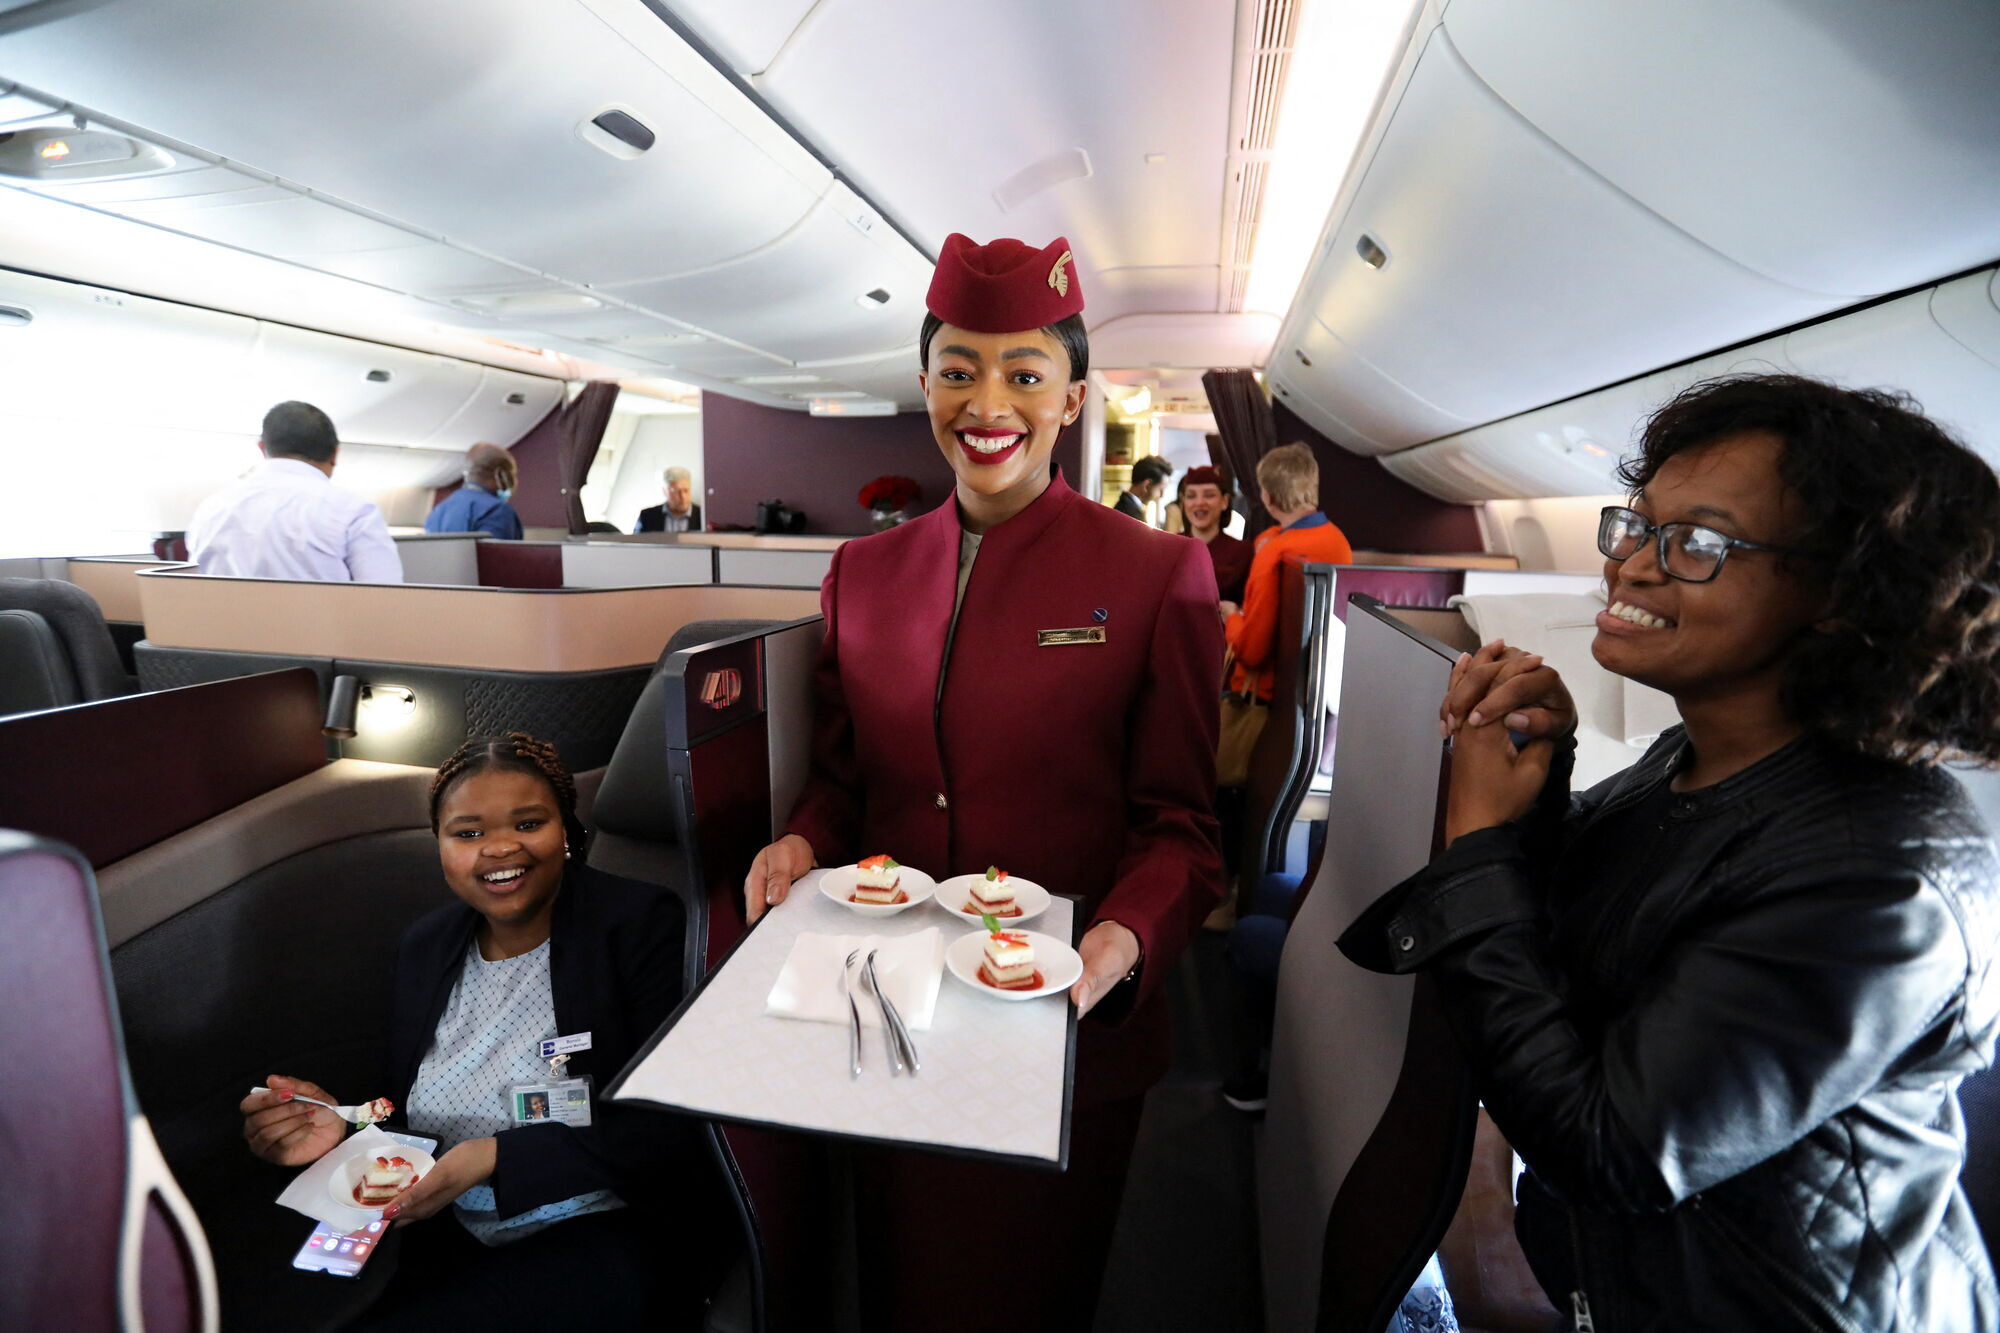 Qatar Airways reports significant traffic growth due to travel boom